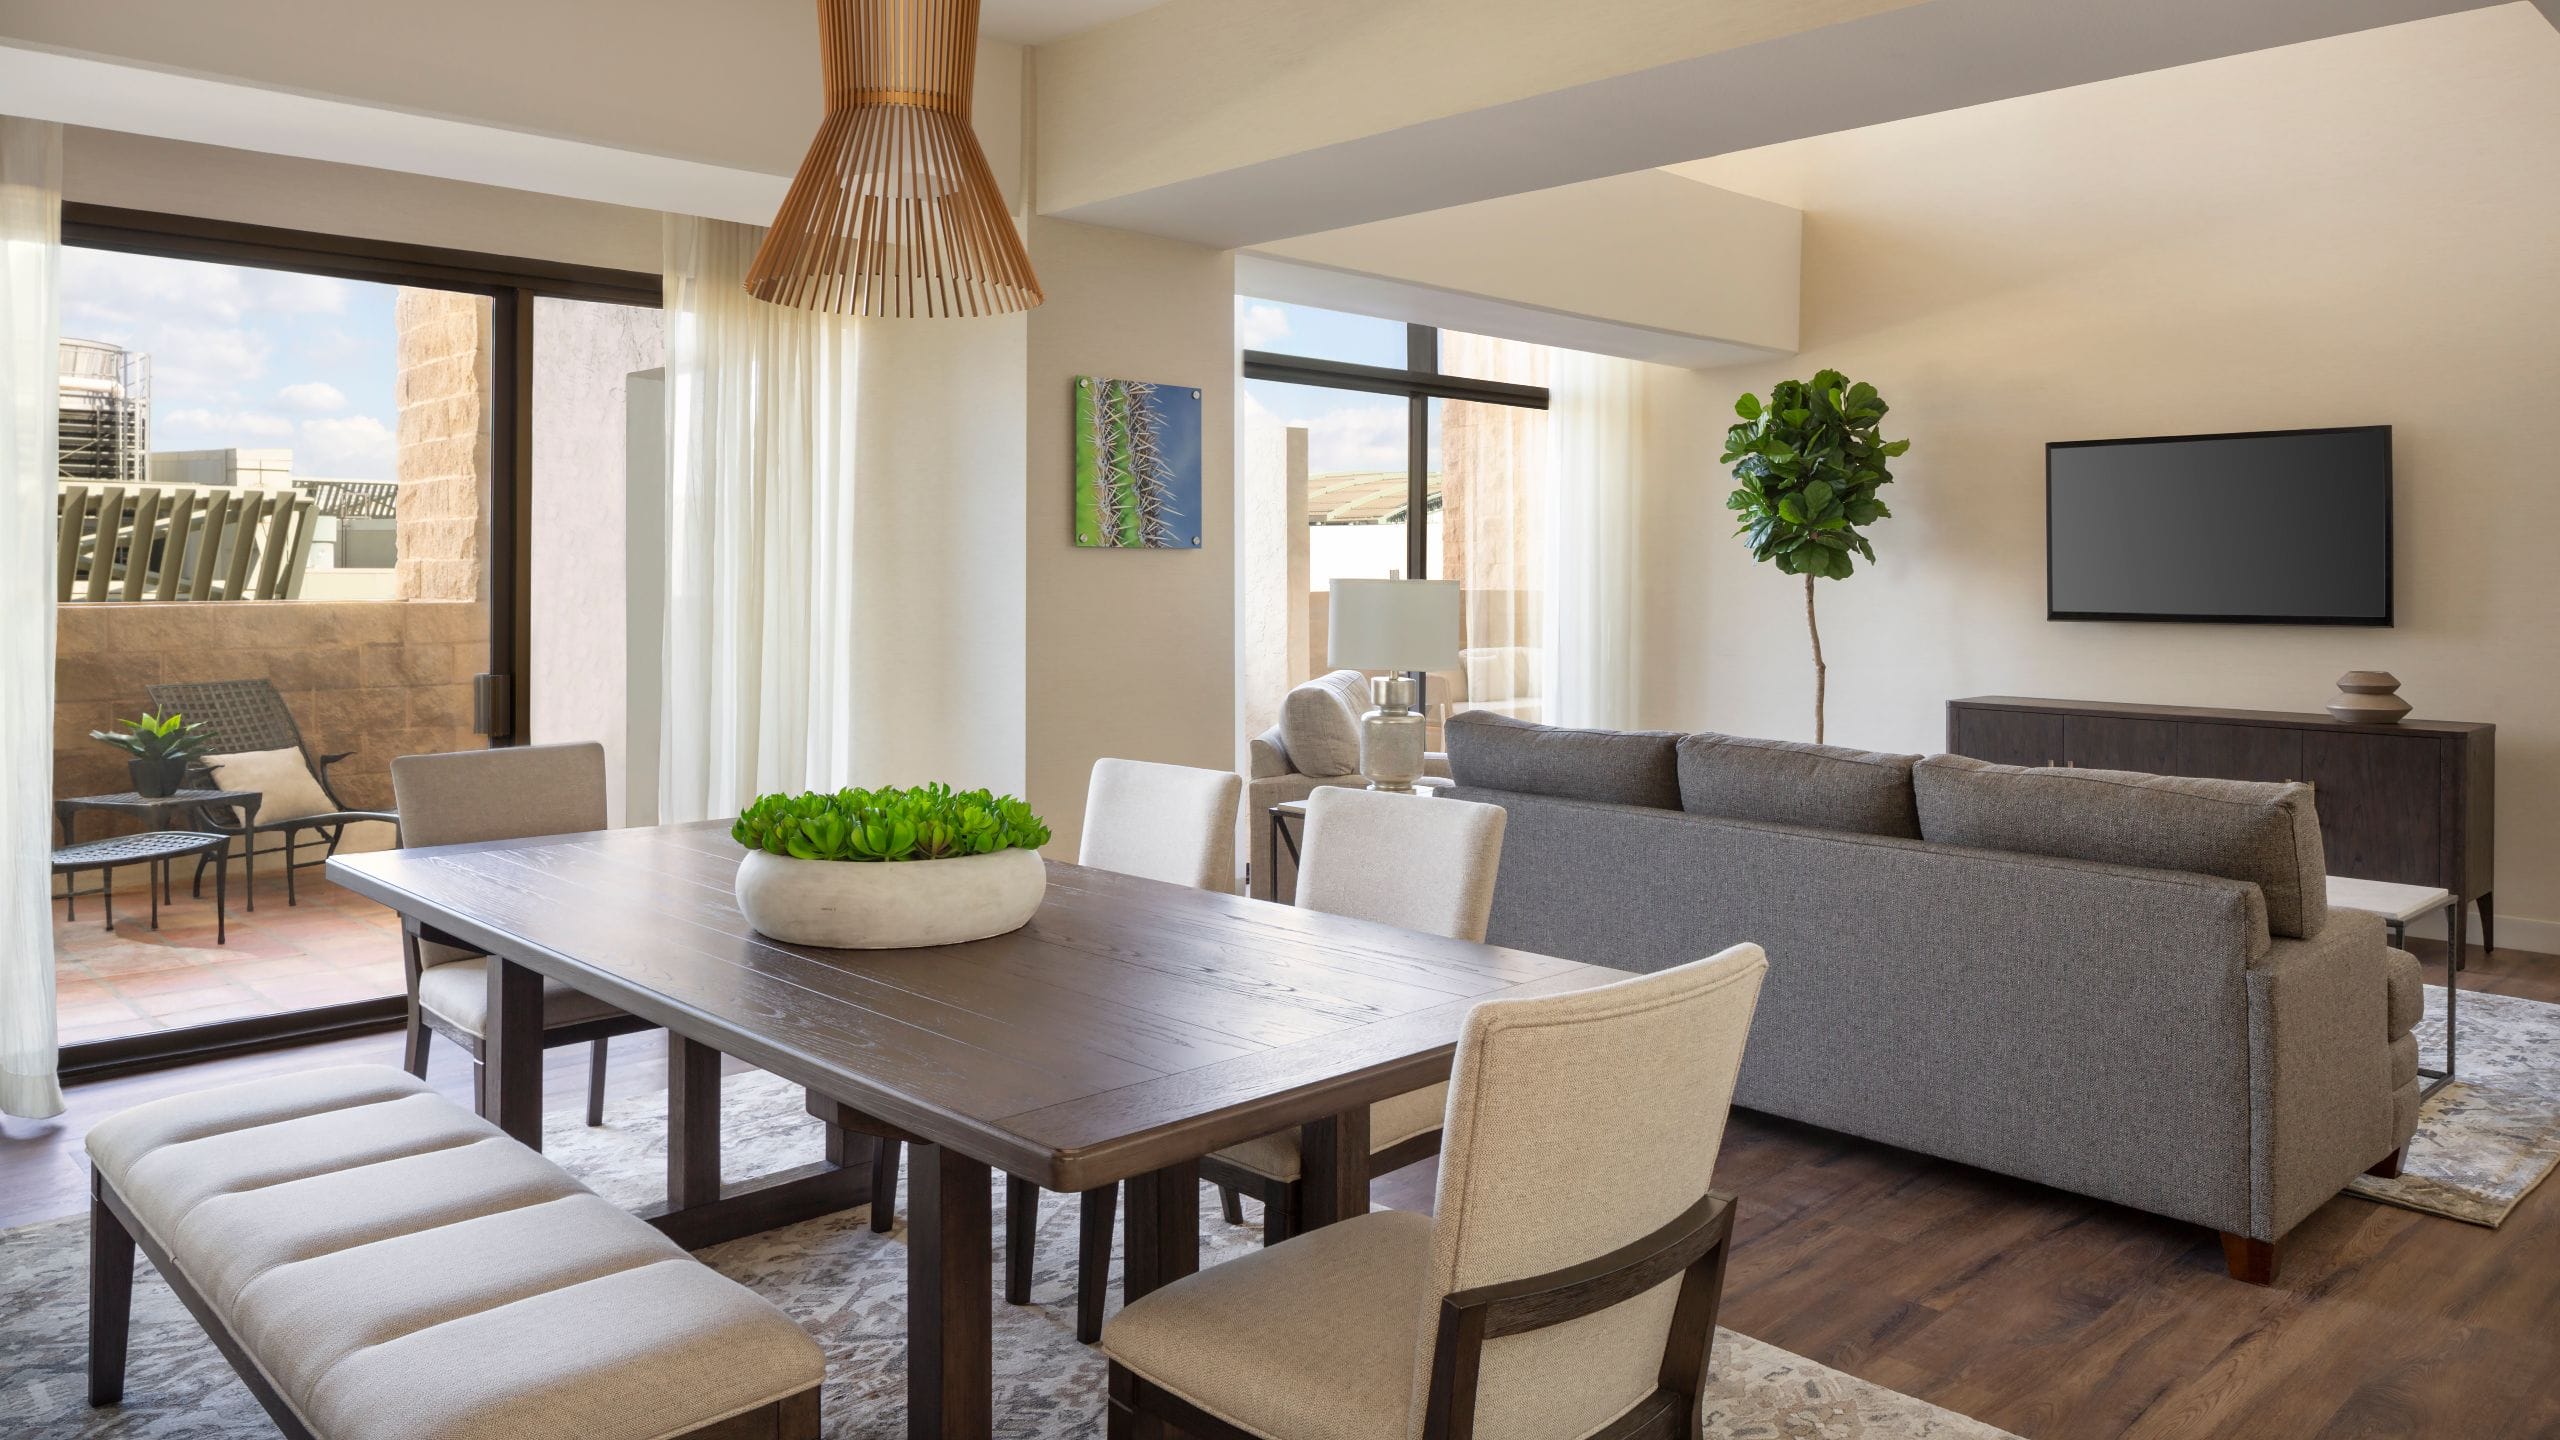 A living room and dining area with a balcony from a hotel suite in downtown Phoenix